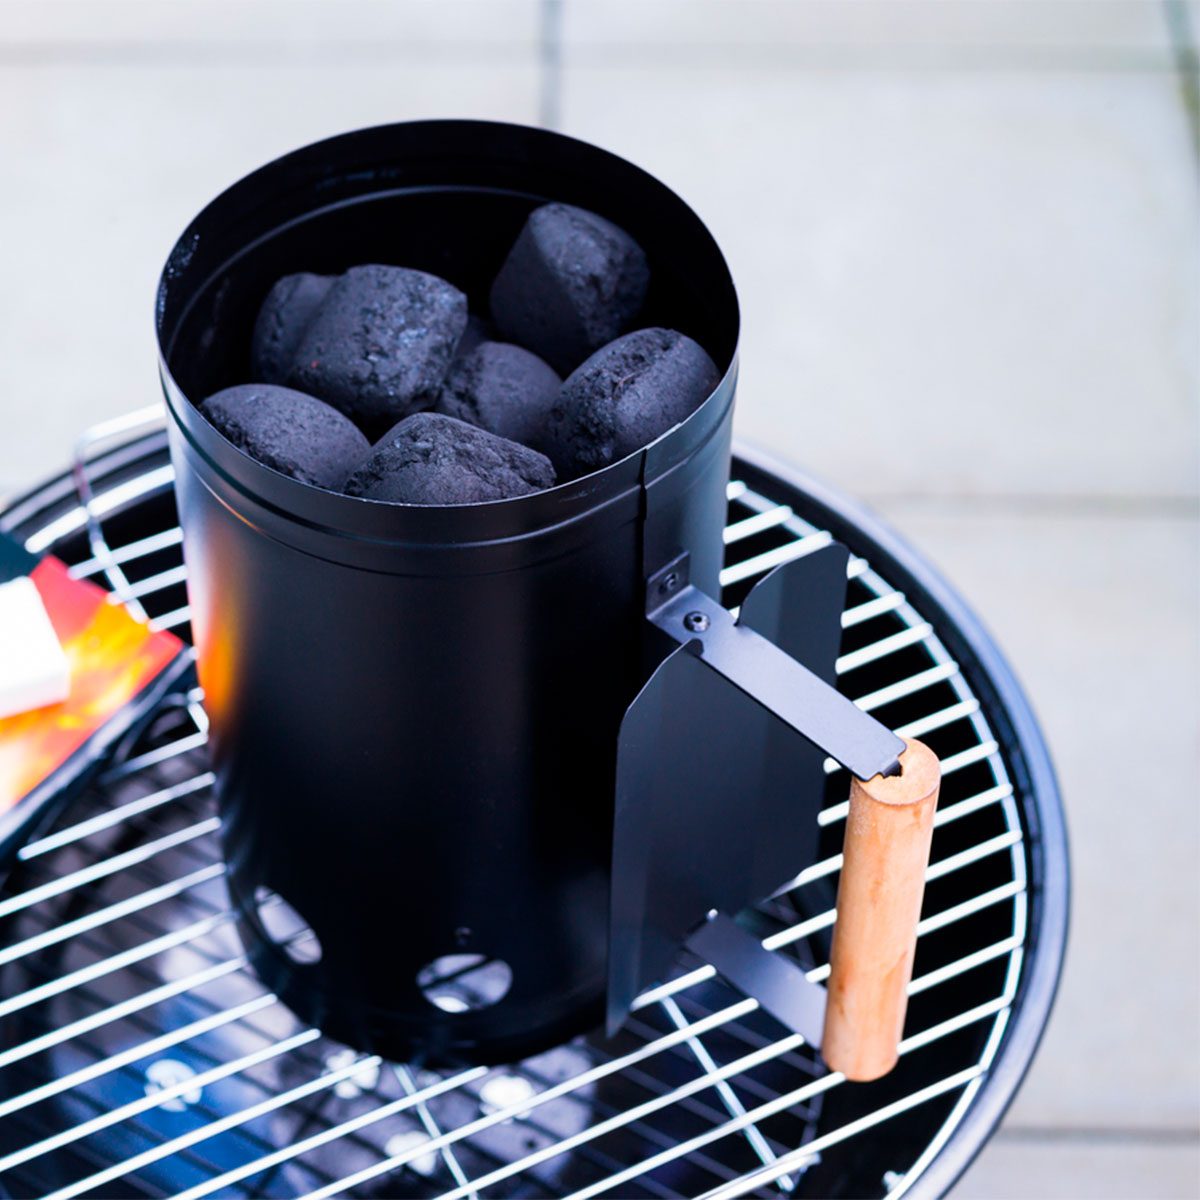 charcoal chimney with black charcoal